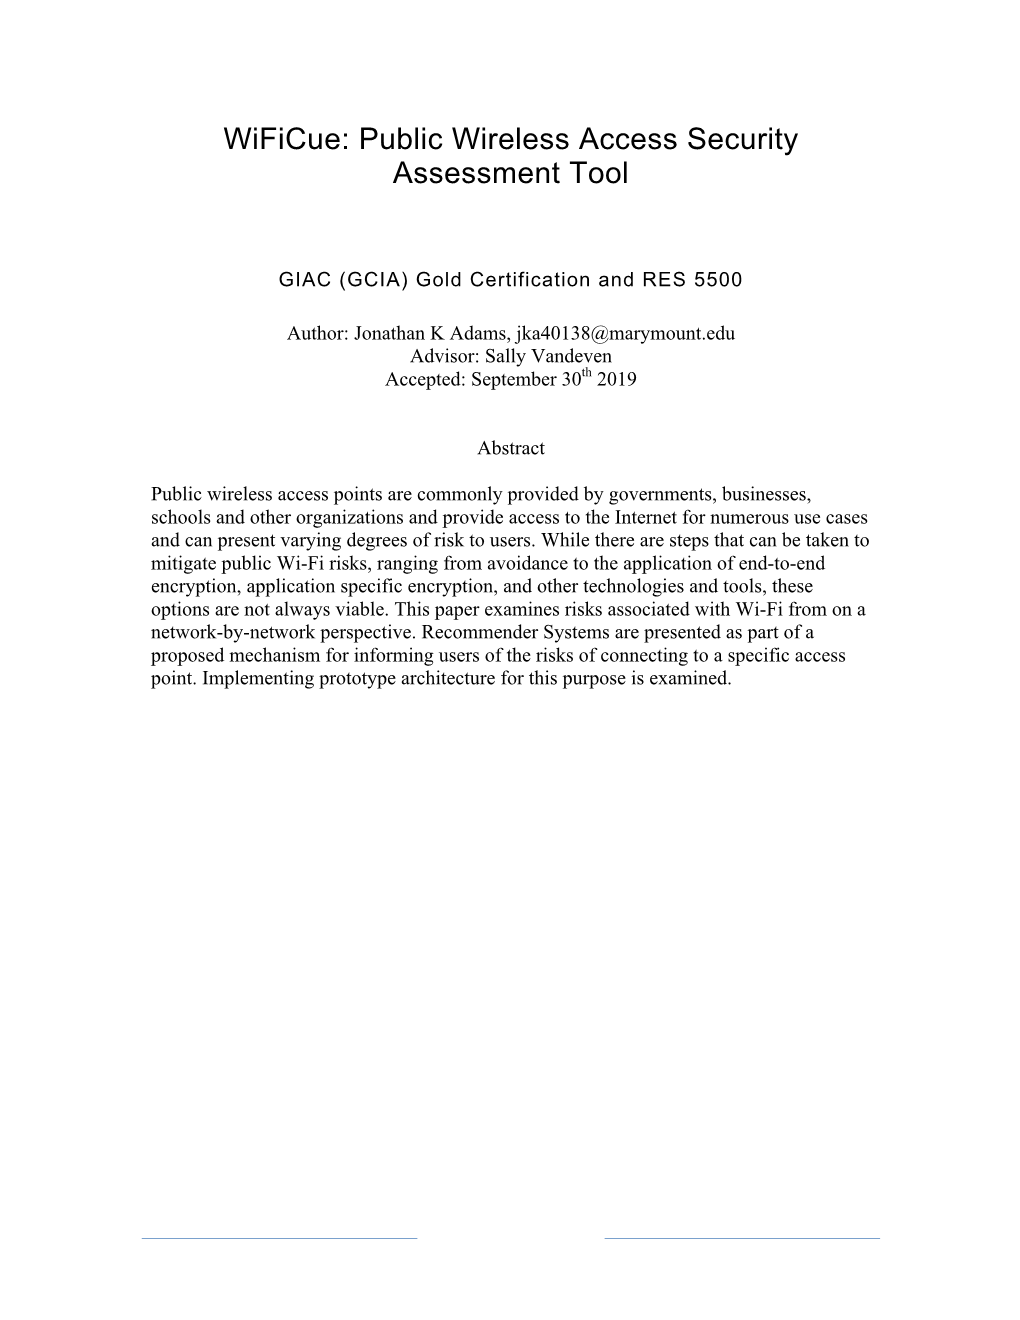 Public Wireless Access Security Assessment Tool